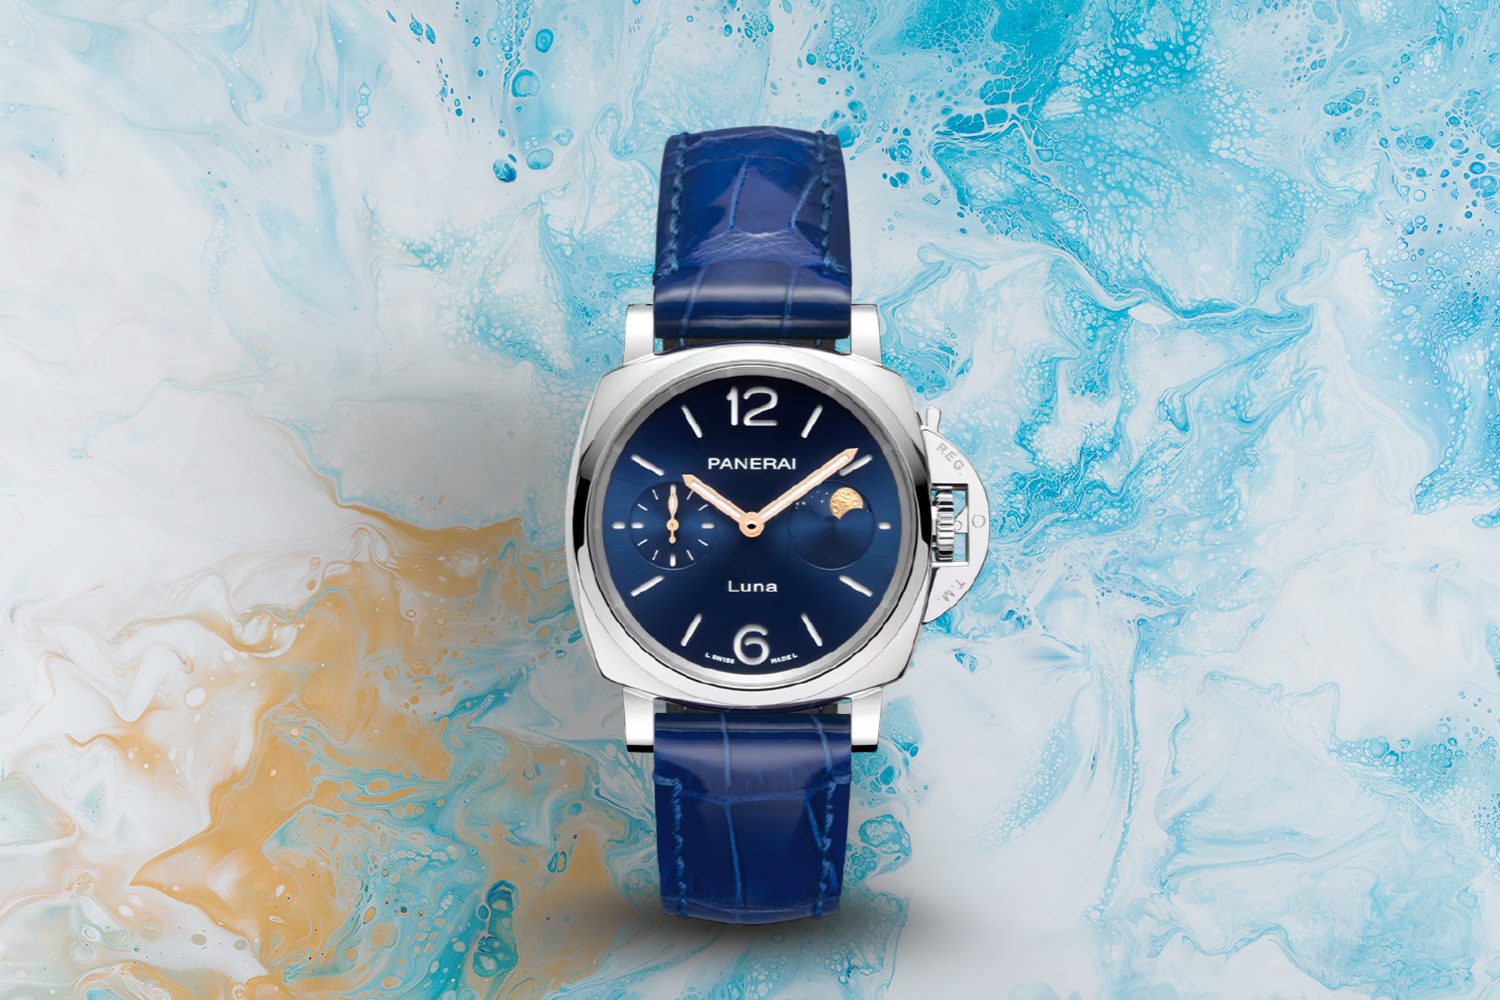 Blue, silver and gold watch